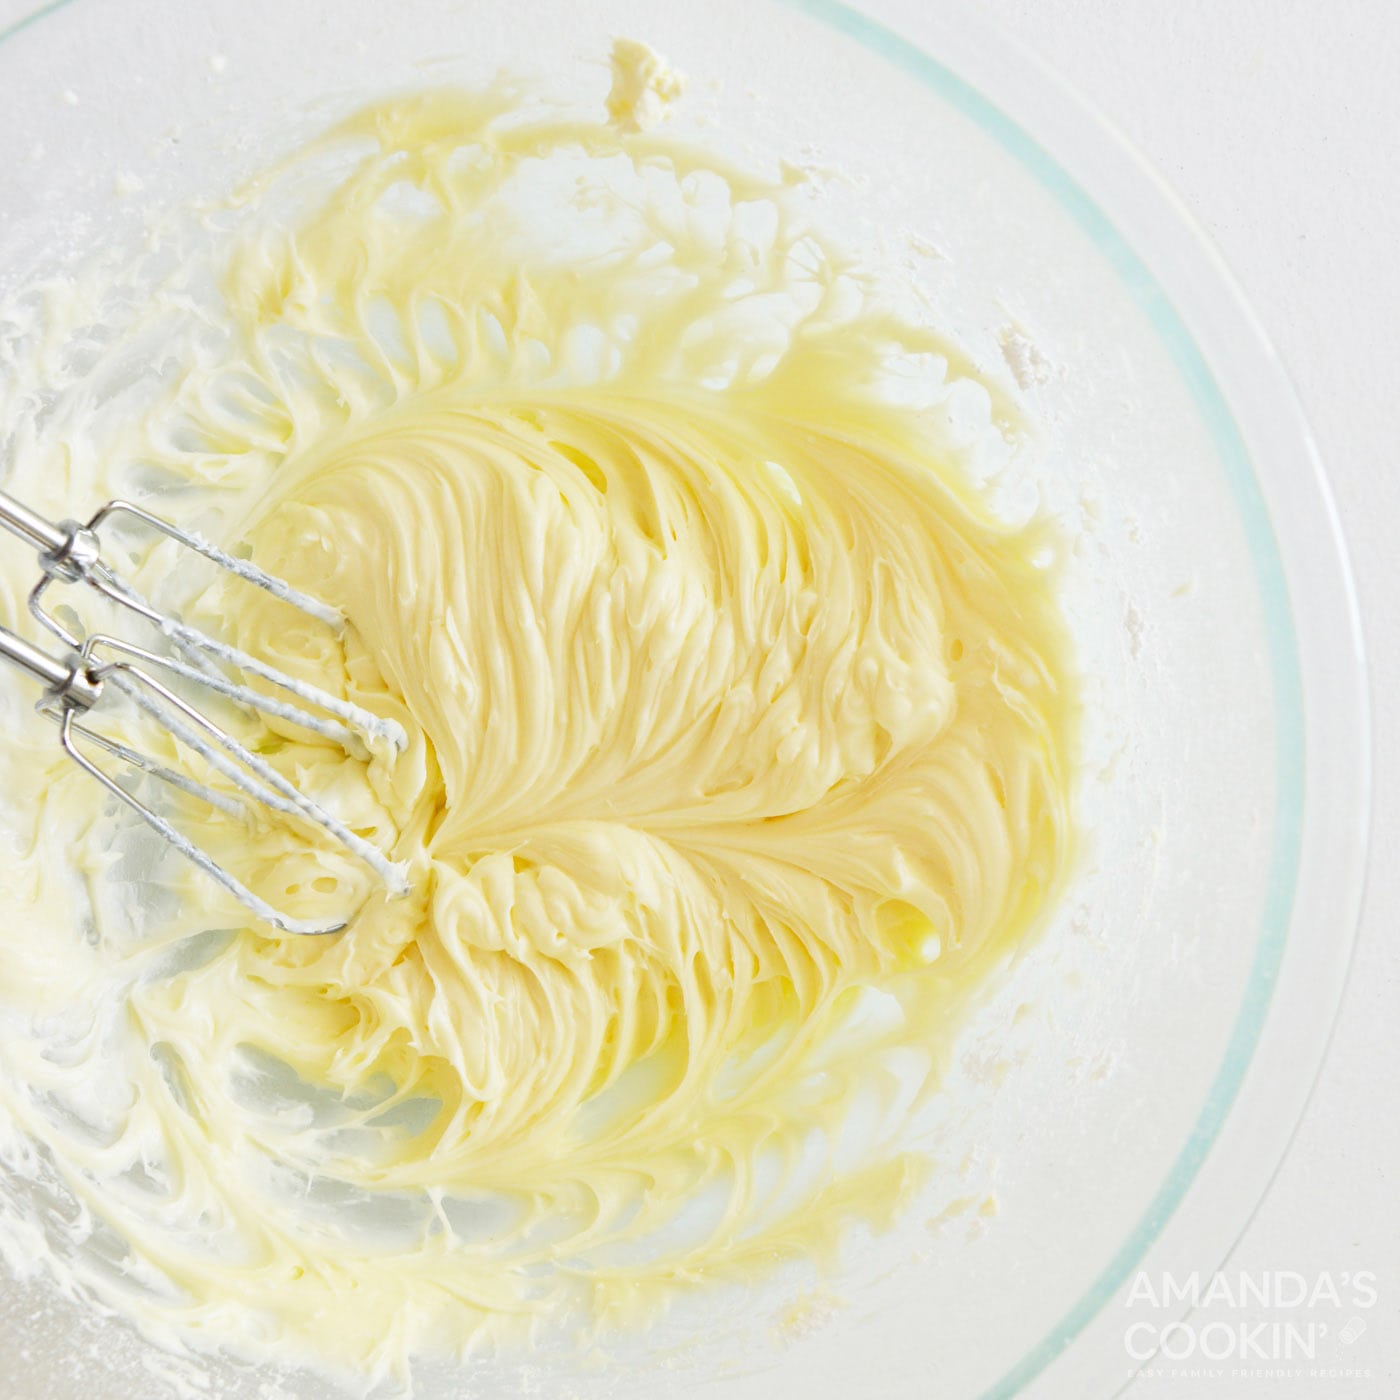 beating cream cheese frosting with a handheld mixer